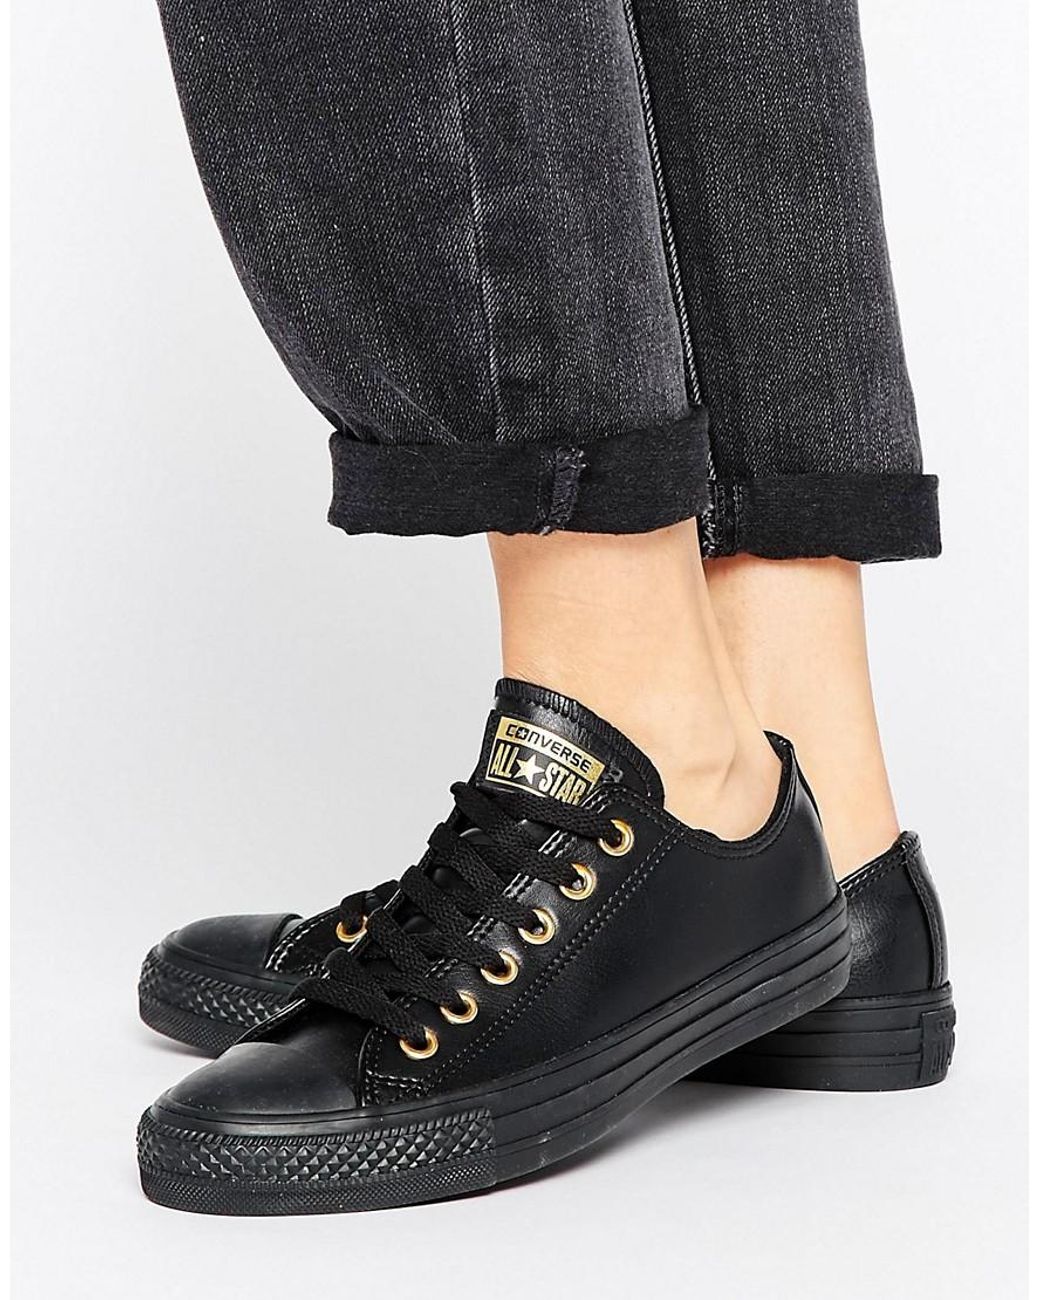 Converse Chuck Taylor Dainty Sneakers In Black With Gold Eyelets | Lyst UK